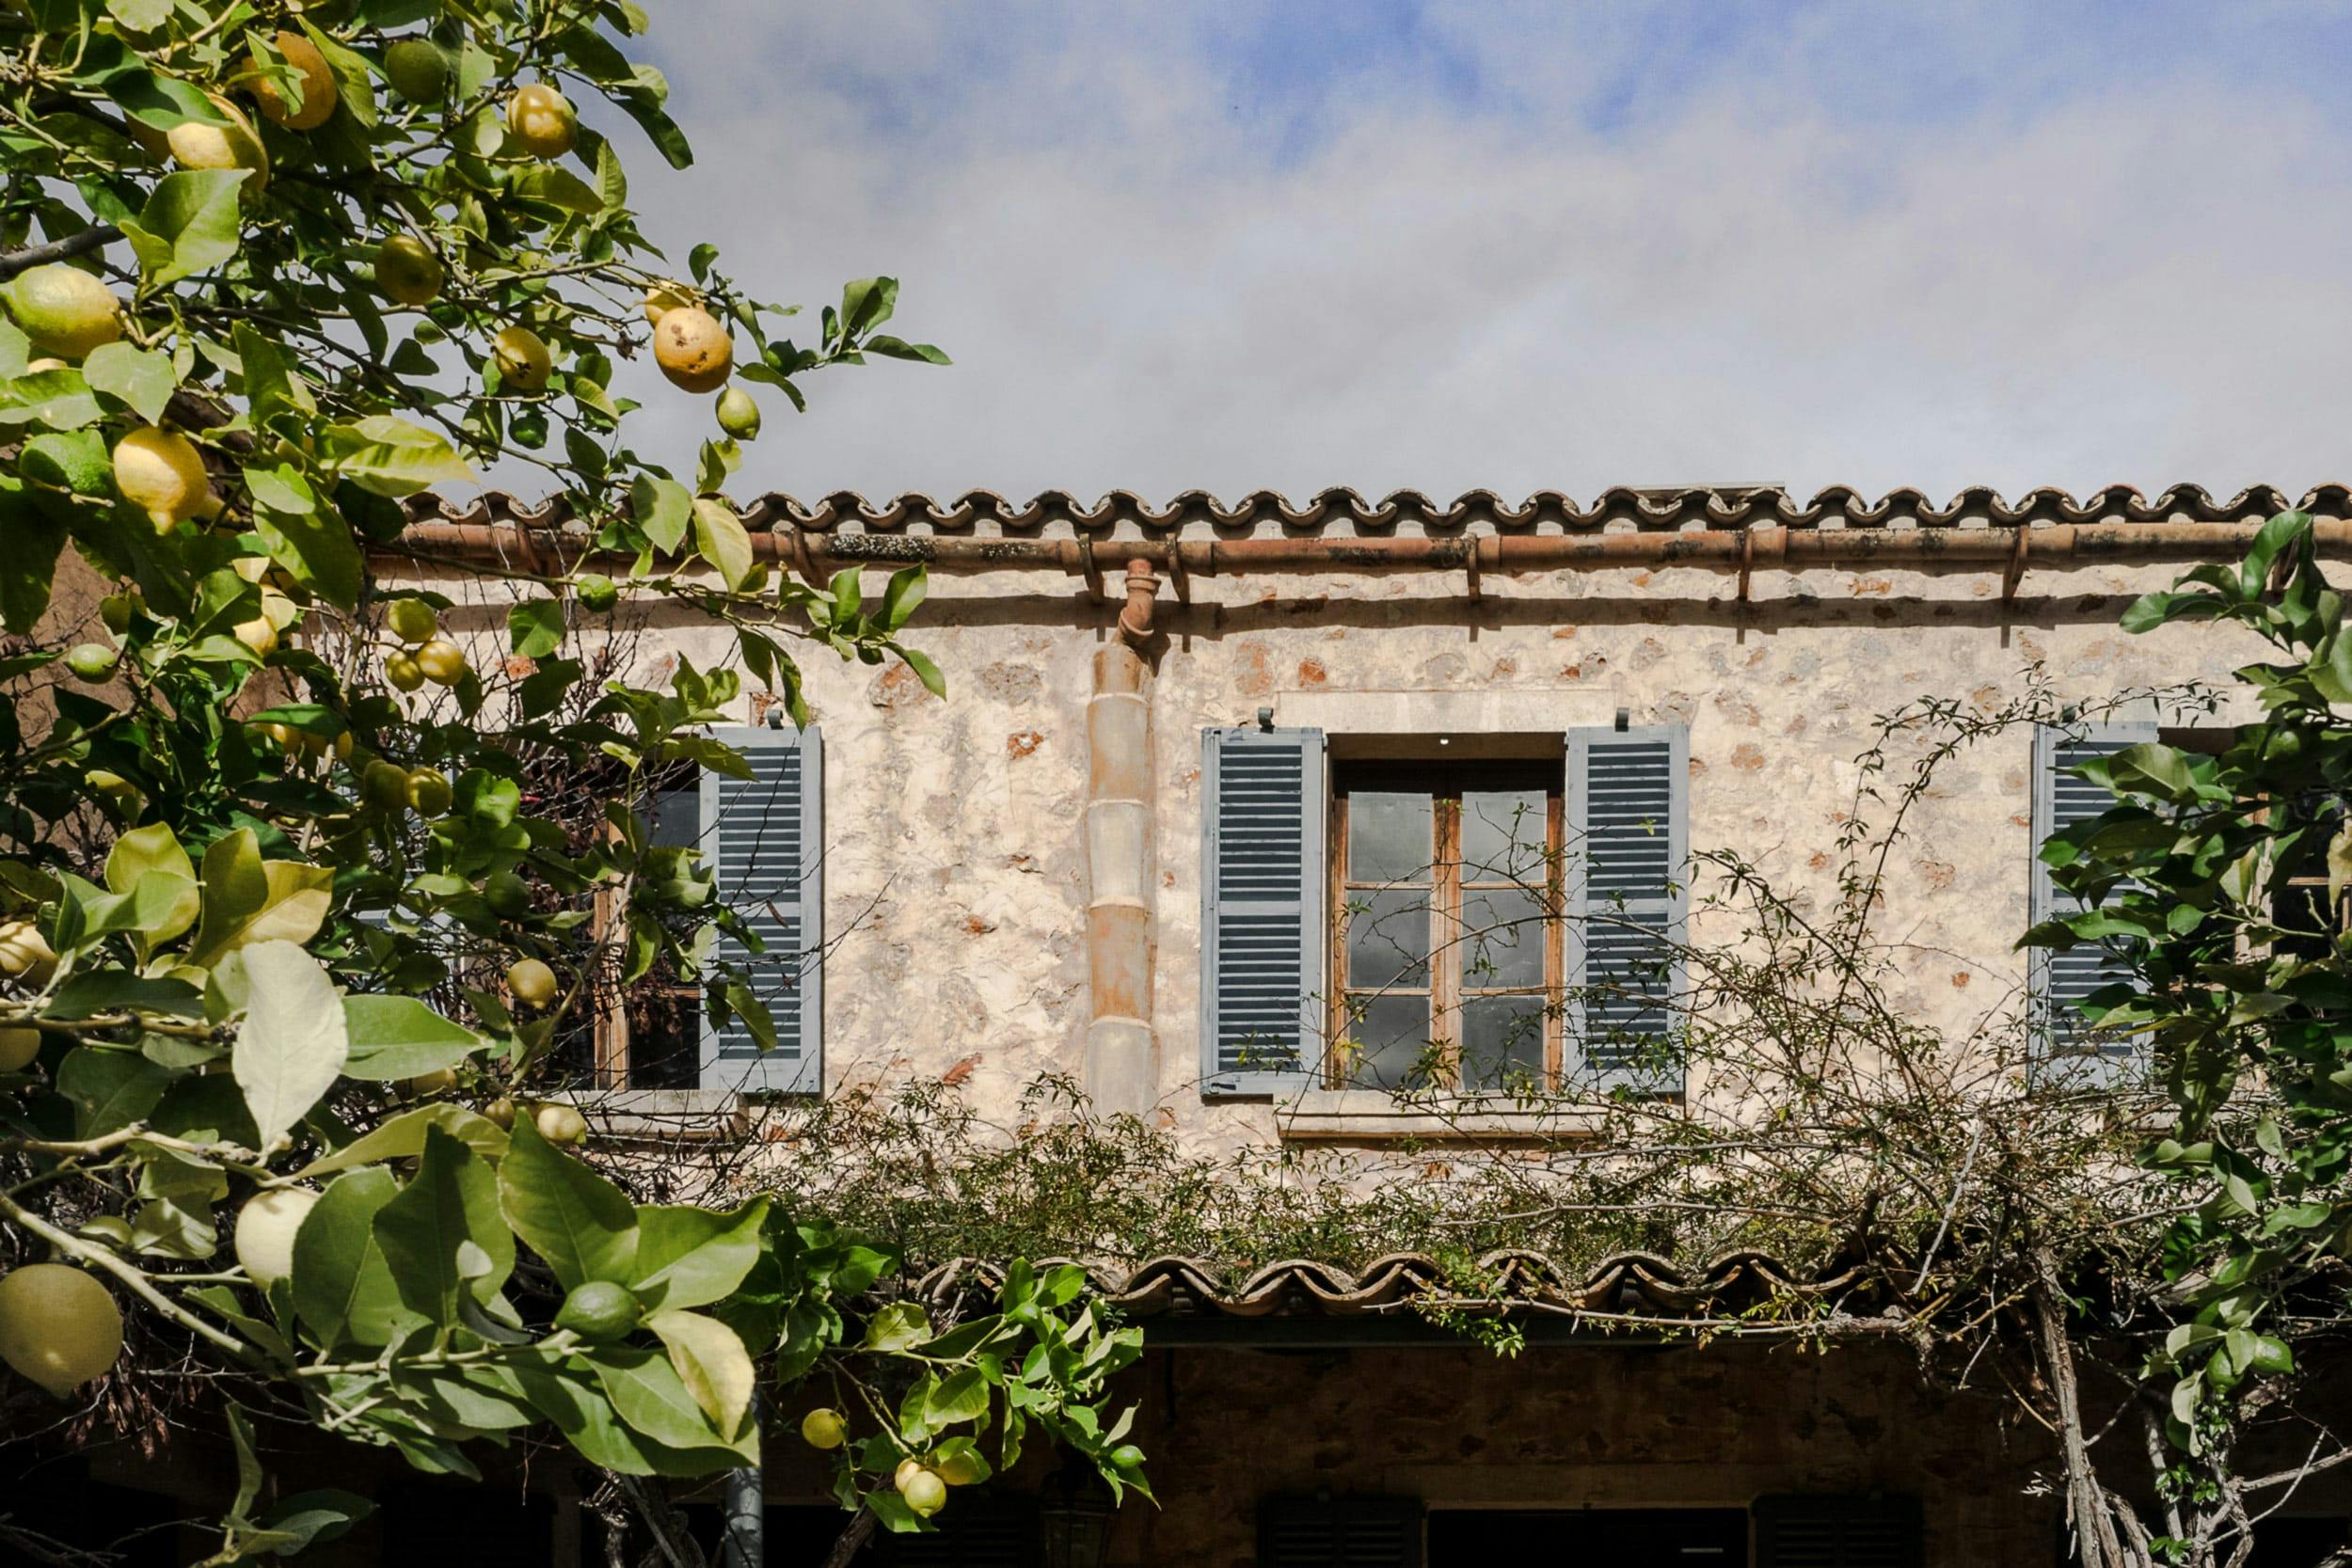 A large, old stone house with a brick facade is surrounded by a lush garden filled with oranges and lemons.